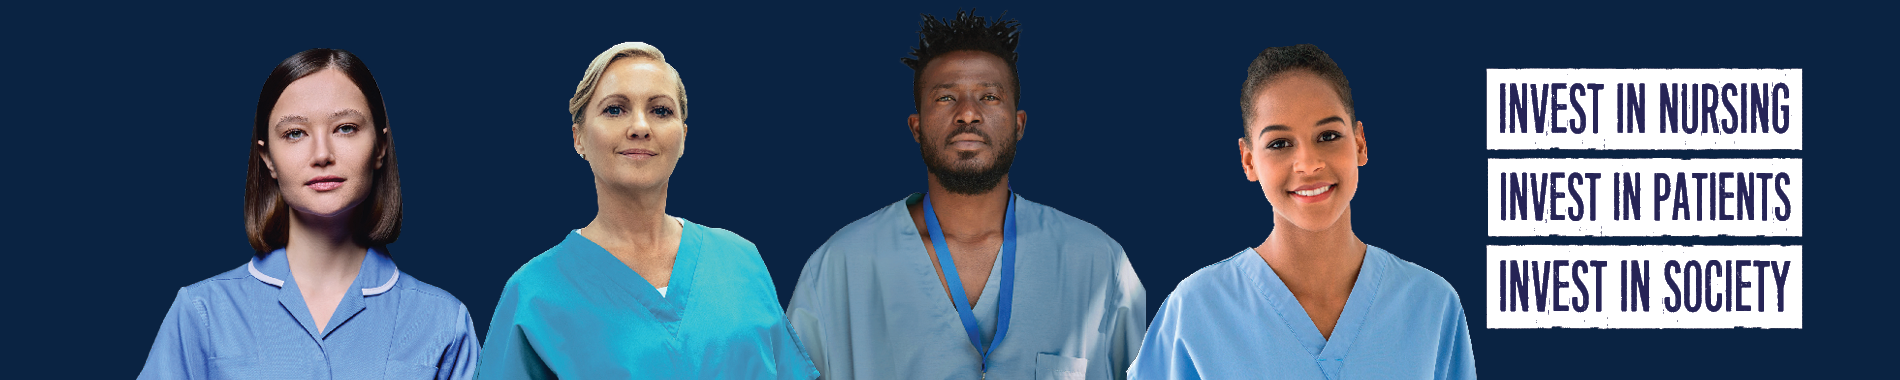 Banner featuring four healthcare professionals in uniforms: a woman in a light blue nursing outfit, a woman in a teal scrubs, a man in dark blue scrubs, and a woman in light blue scrubs. The text on the right side reads, 'INVEST IN NURSING, INVEST IN PATIENTS, INVEST IN SOCIETY'.